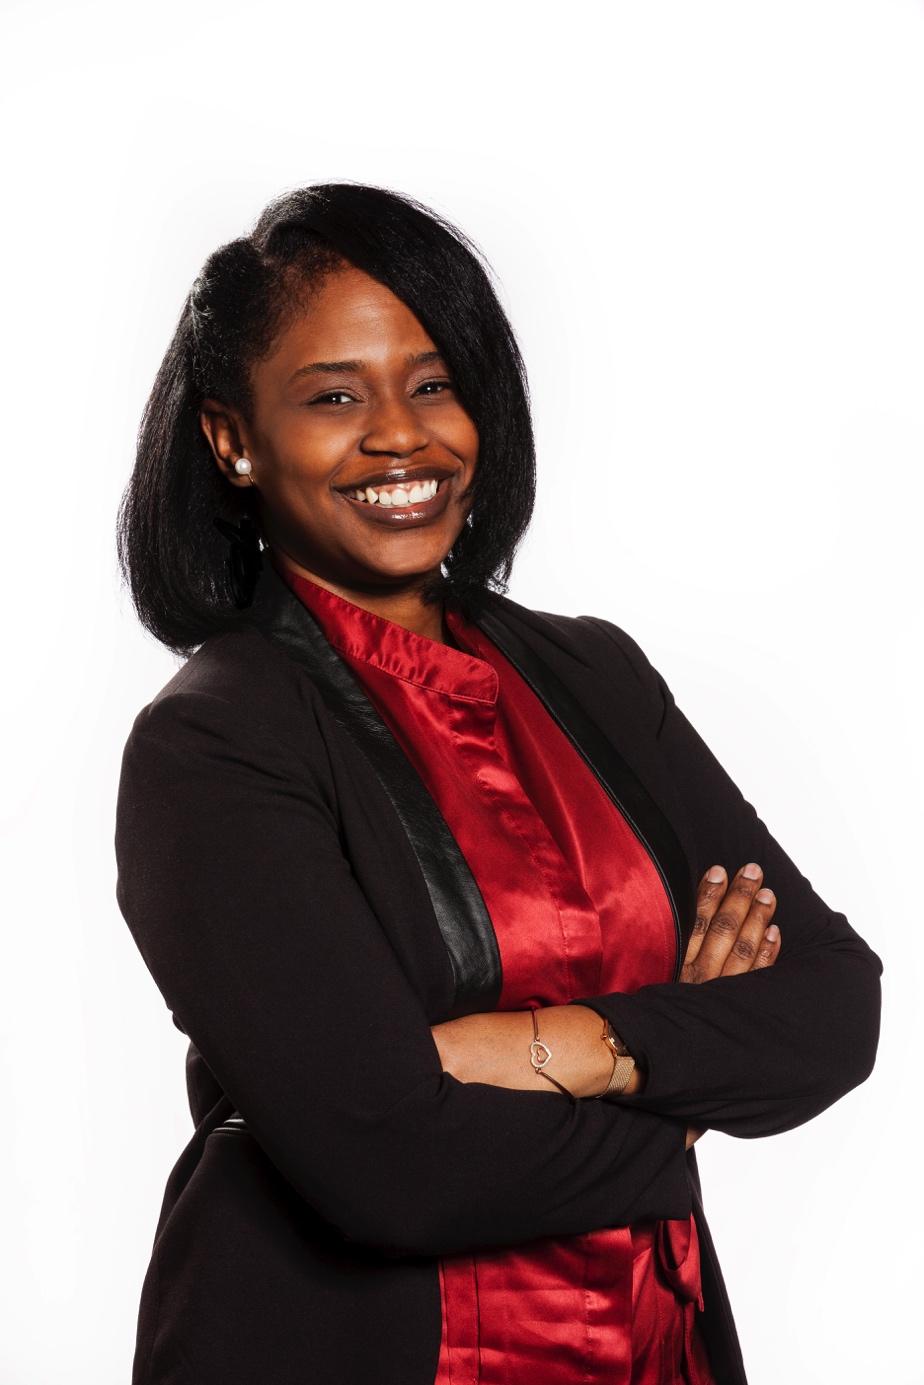 Rashanda Perryman-Stiff Rashanda Perryman-Stiff is a Program Officer at Vanguard in the Corporate Philanthropy Division.